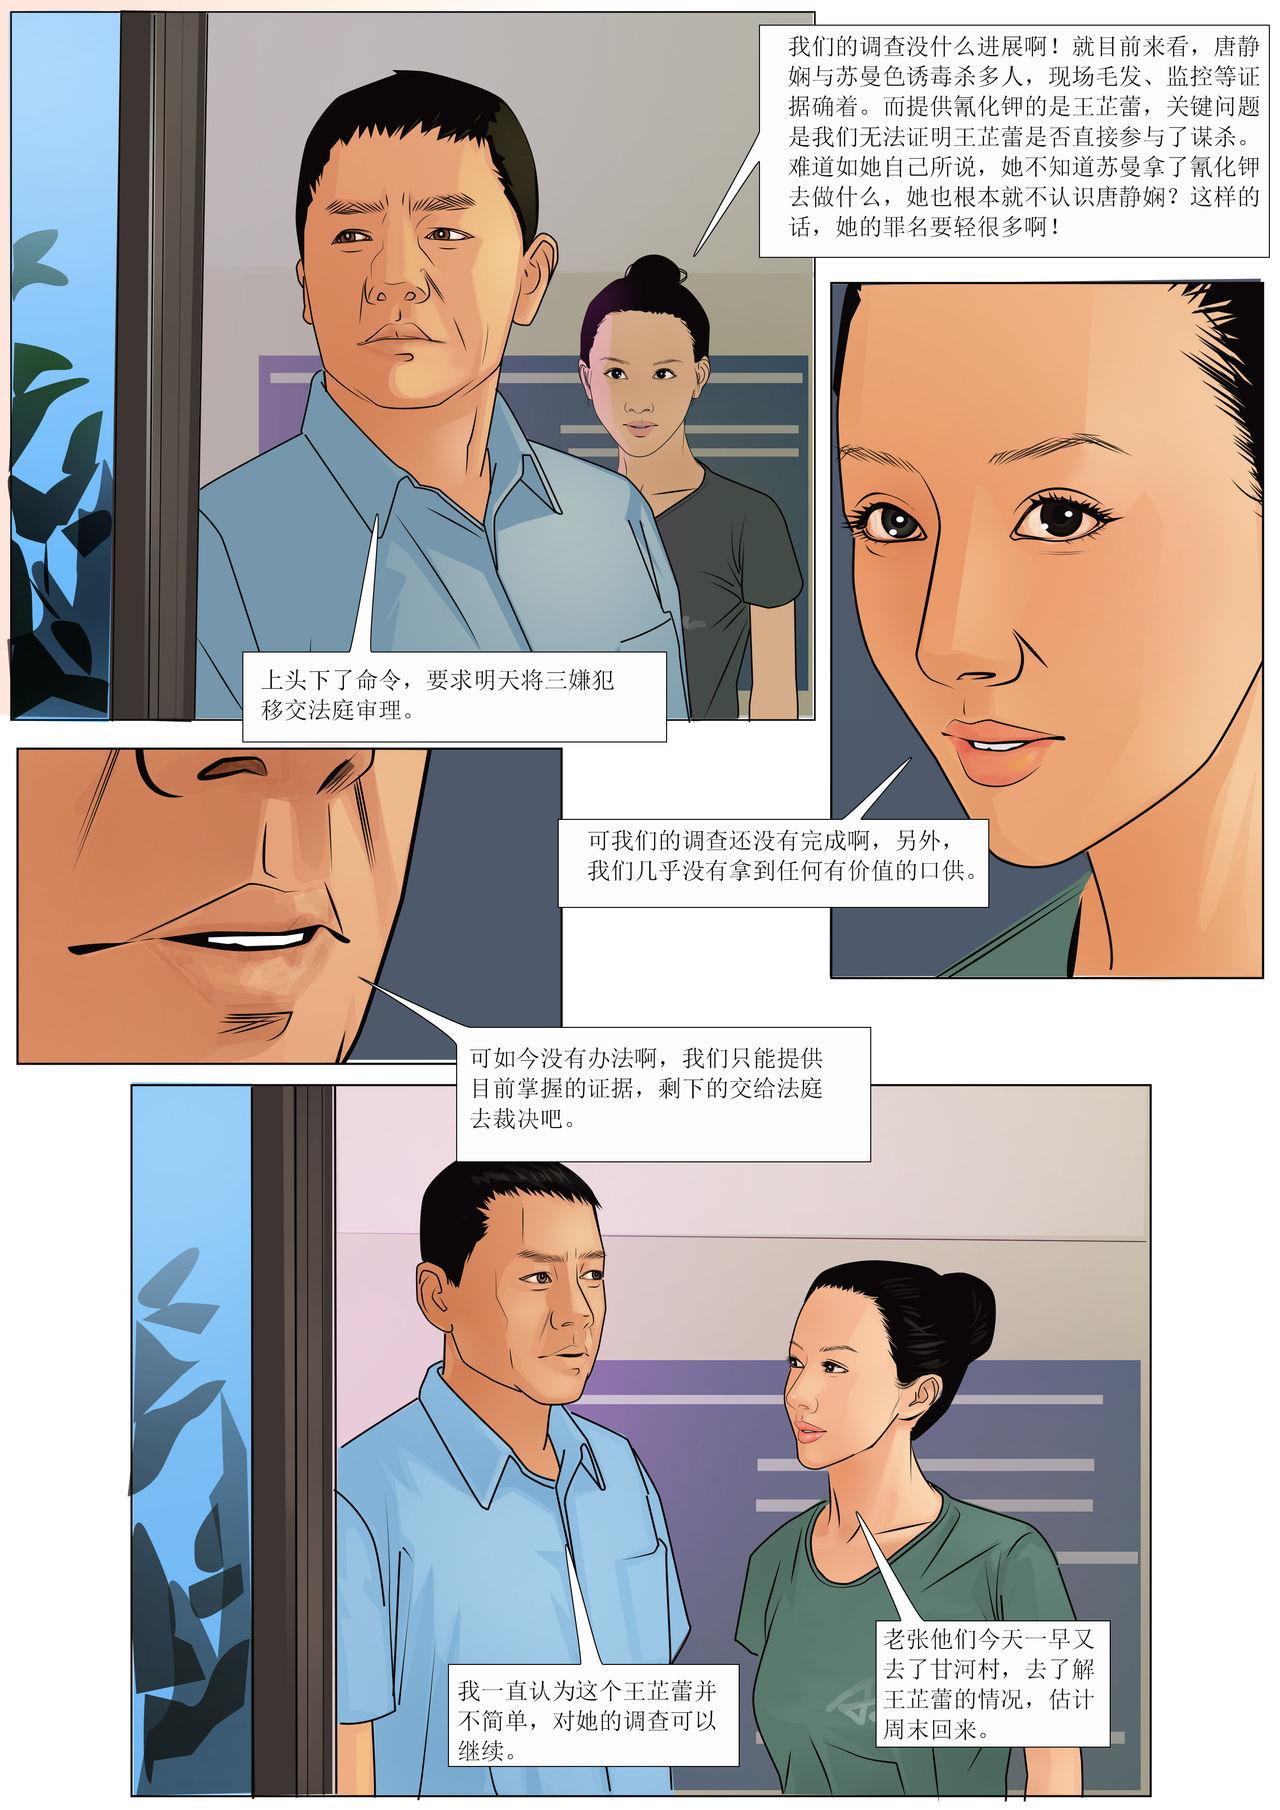 Long Hair 枫语漫画 Foryou 《极度重犯》第八话 Three Female Prisoners 8 Chinese Free Rough Porn - Page 6